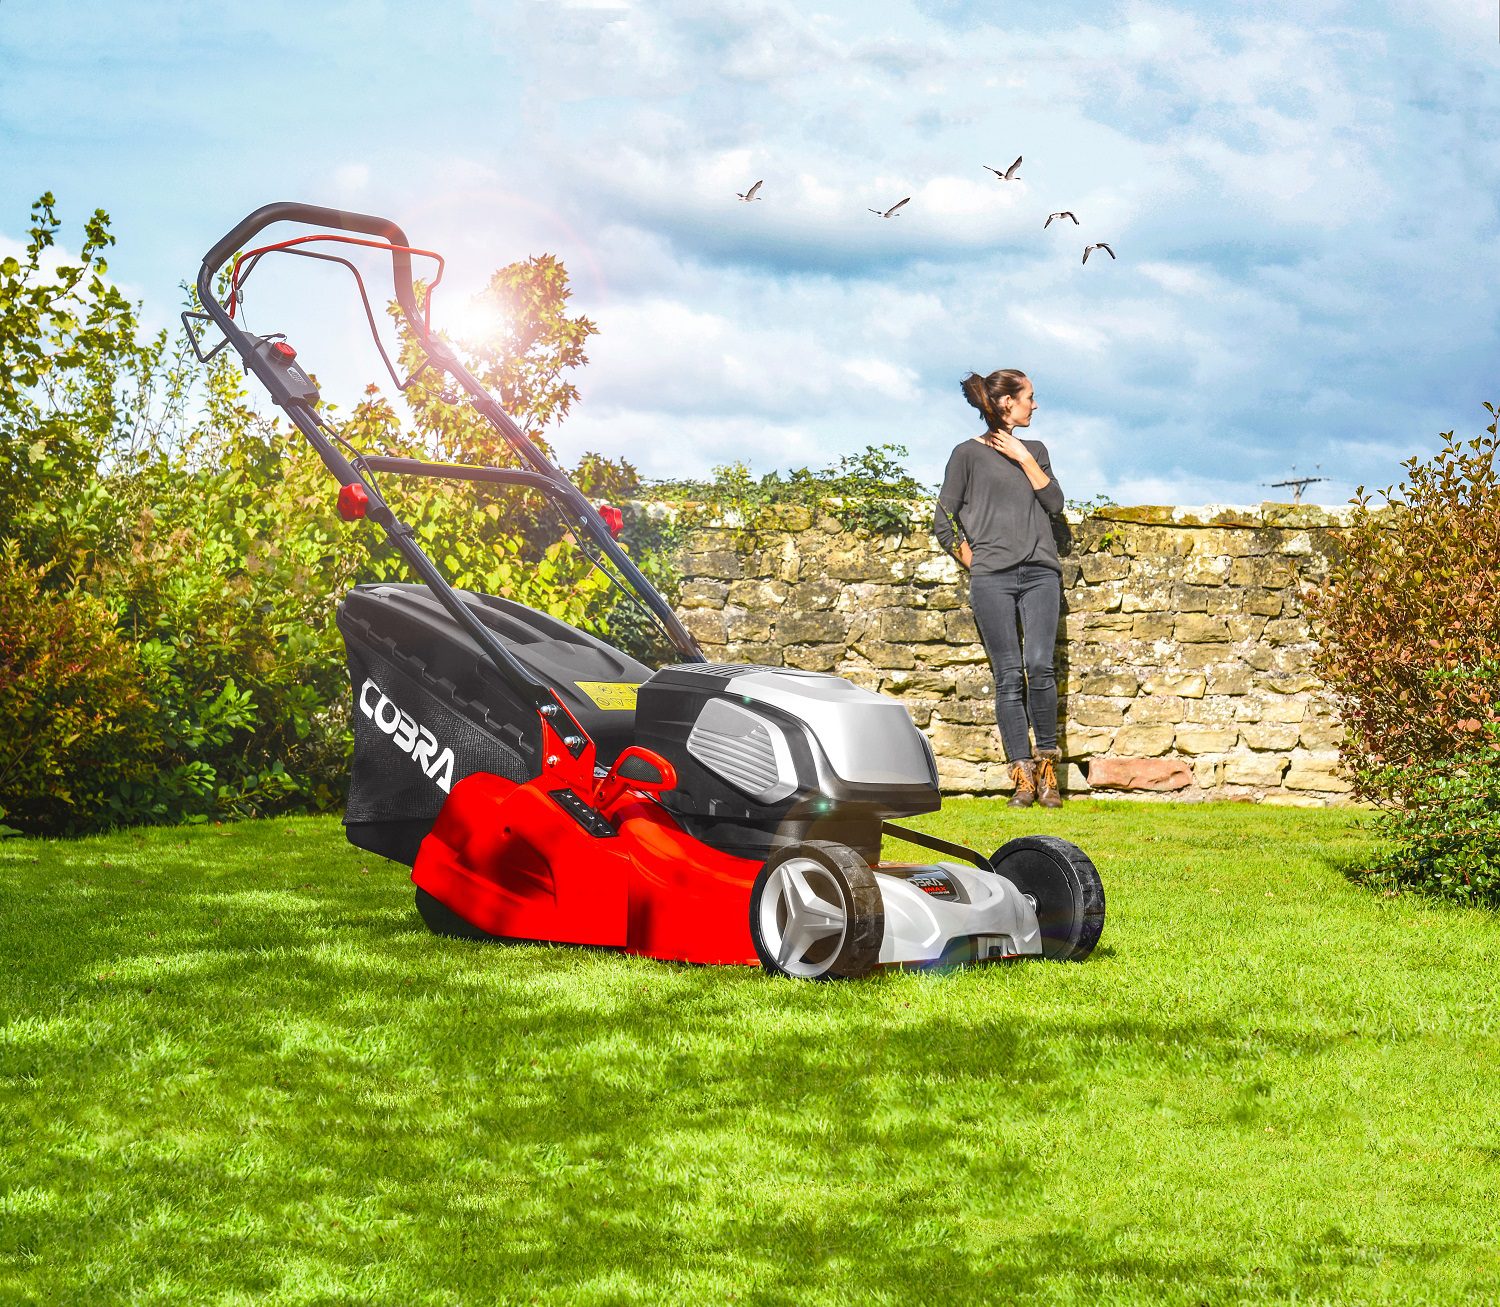 A red lawn mower on a grassy lawn, with a woman standing against a low brick wall in the background